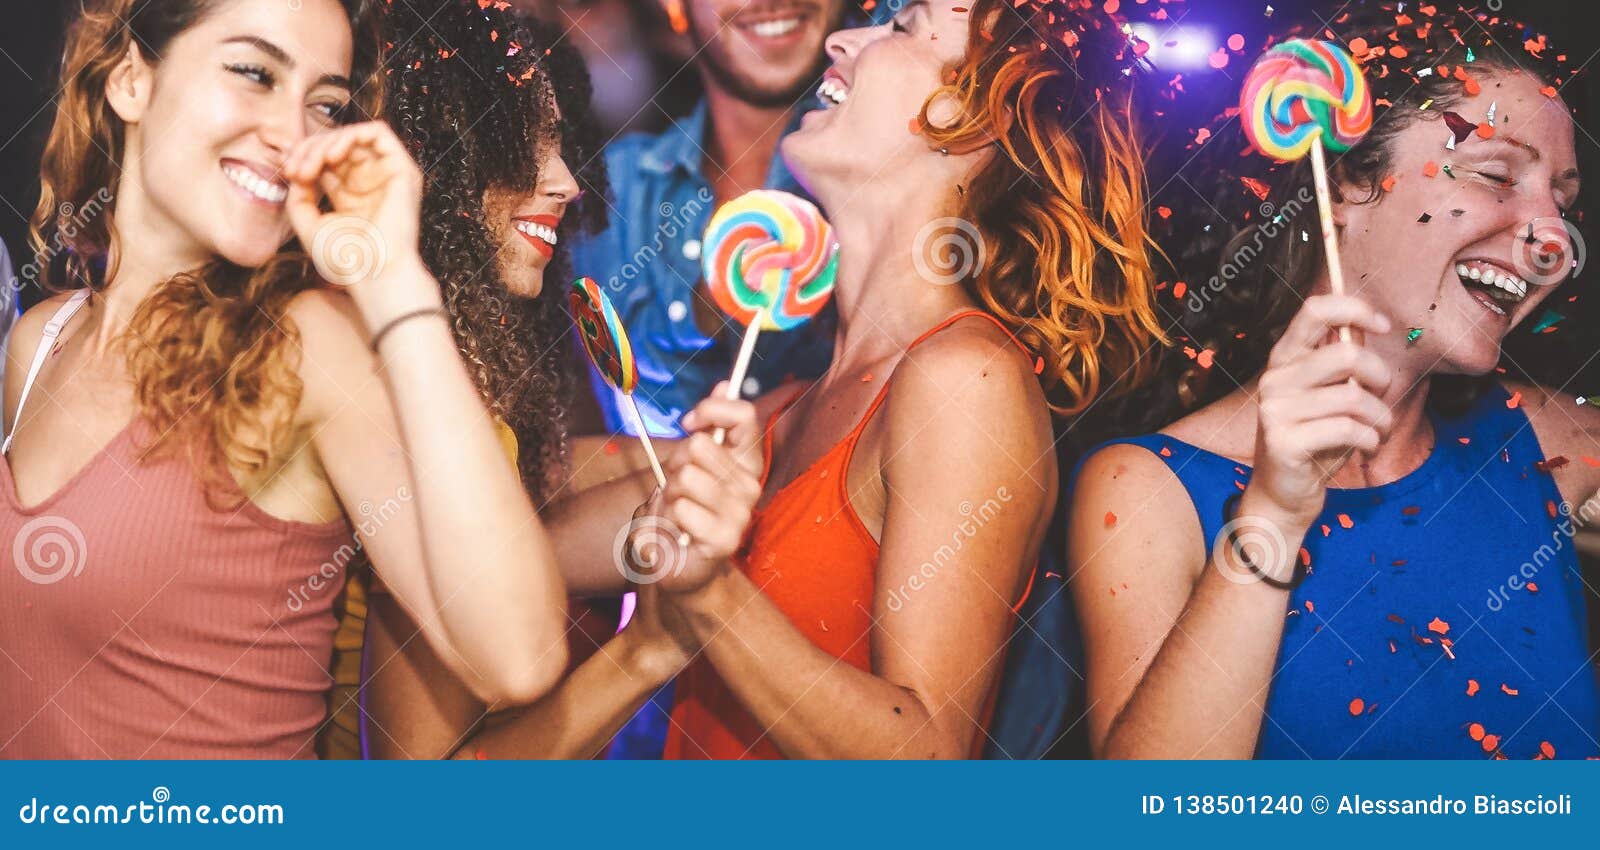 happy friends doing party dancing in the nightclub - trendy young people having fun celebrating together with confetti and candy